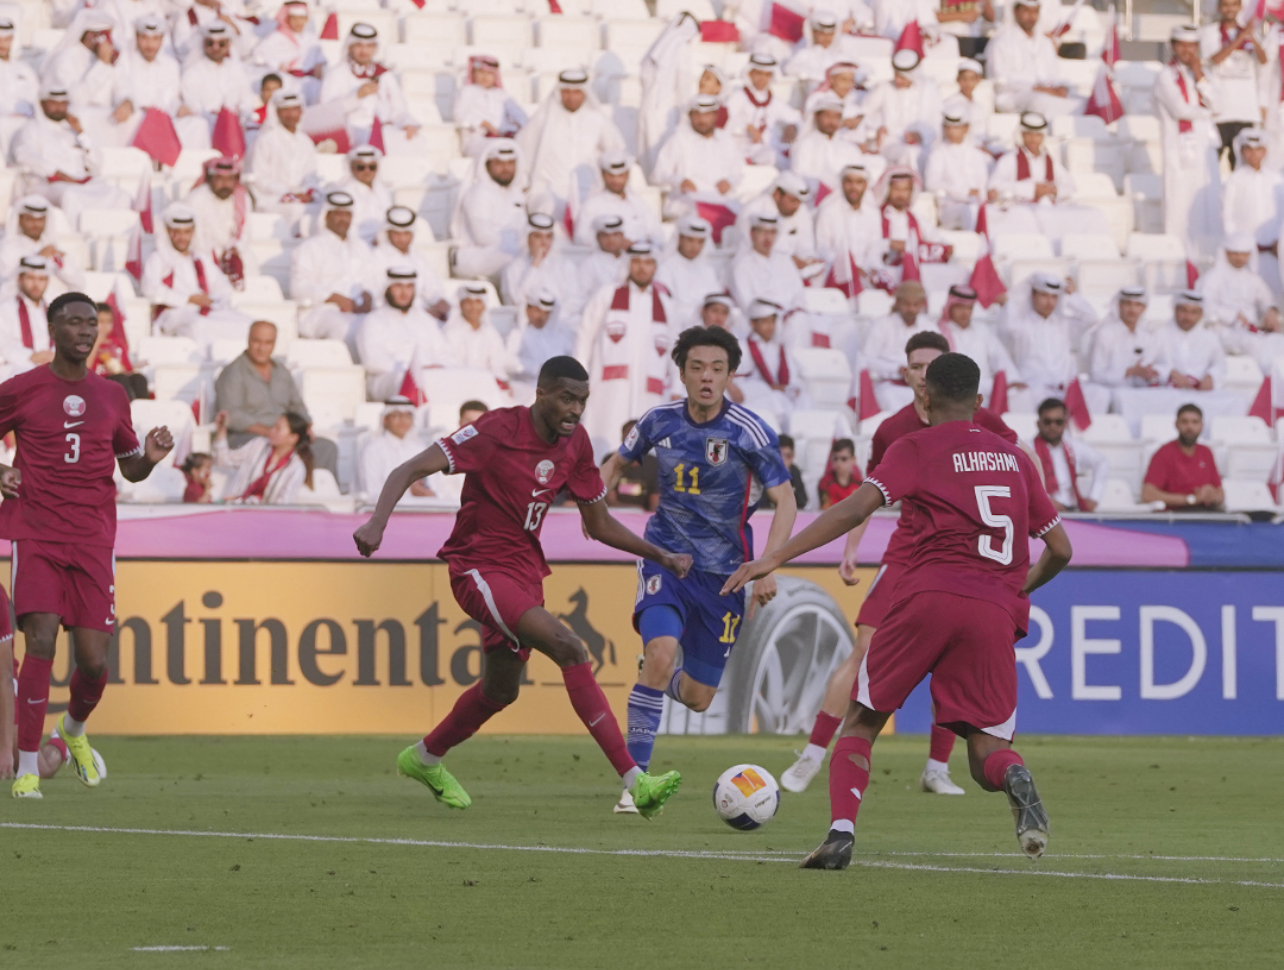 Bahrain holds Qatar to 1-1 draw at U17 Asian qualifiers